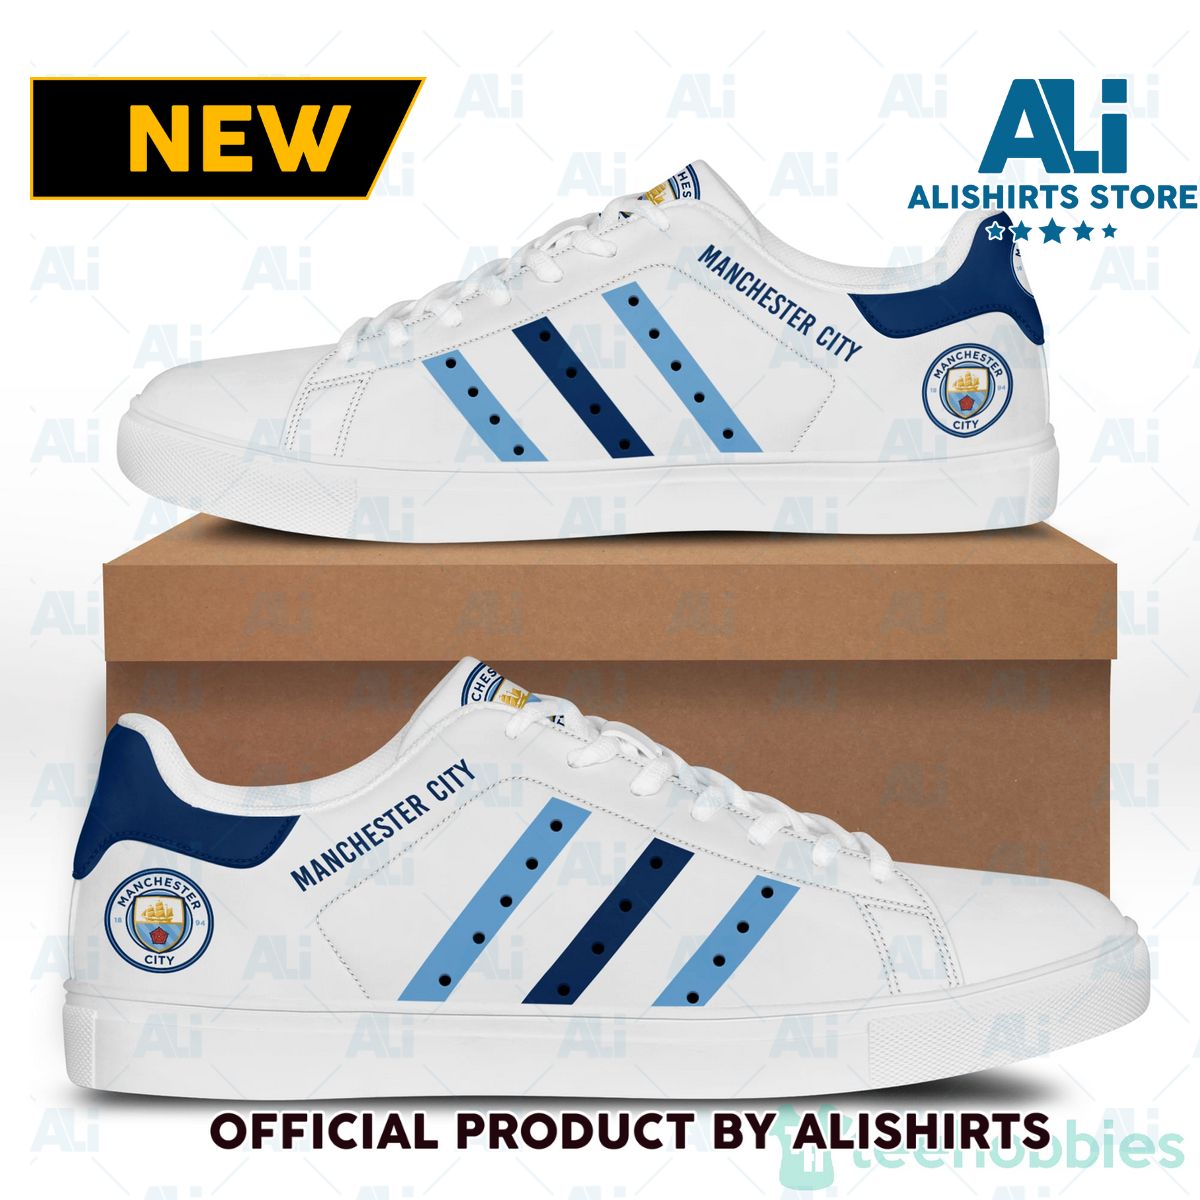 Manchester City Adidas Stan Smith Low Top Skate Shoes